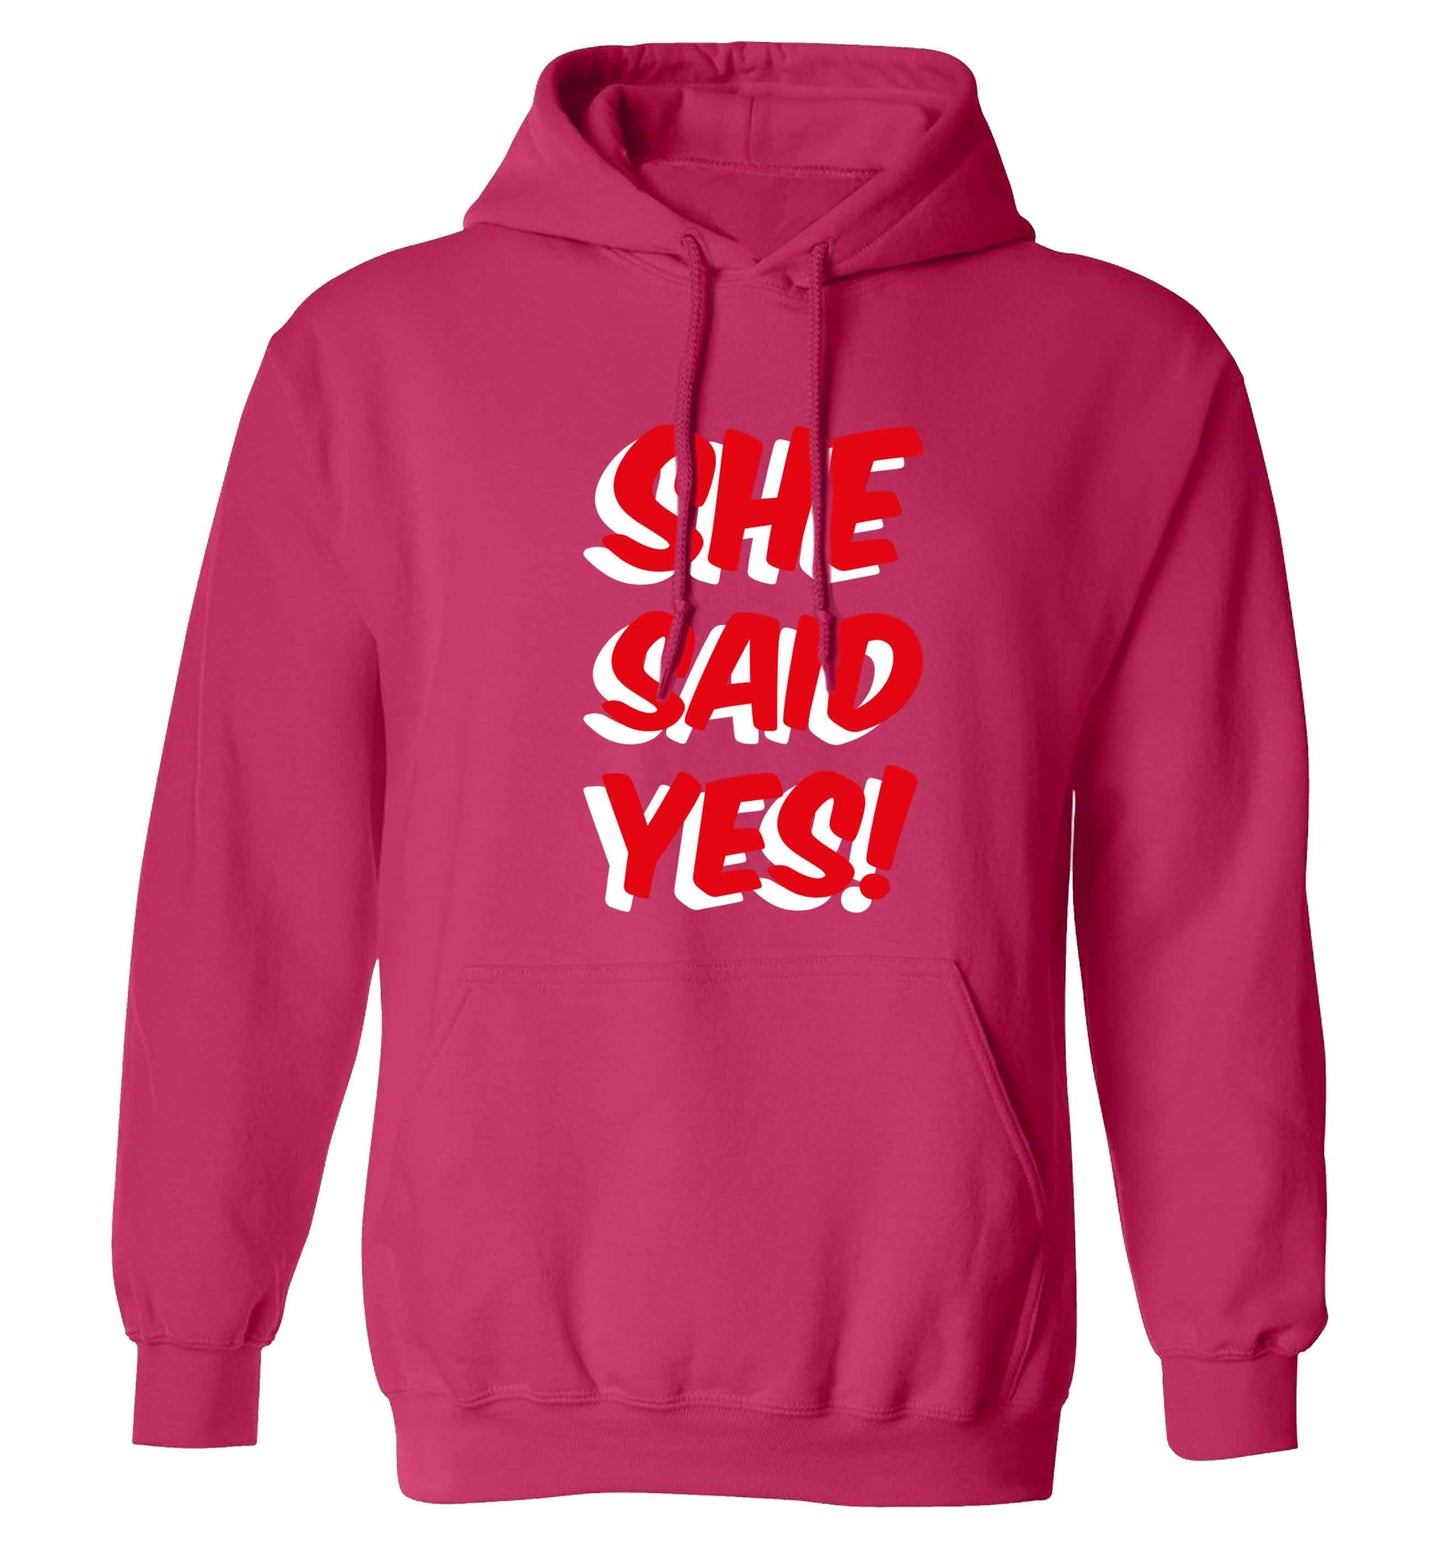 She said yes adults unisex pink hoodie 2XL